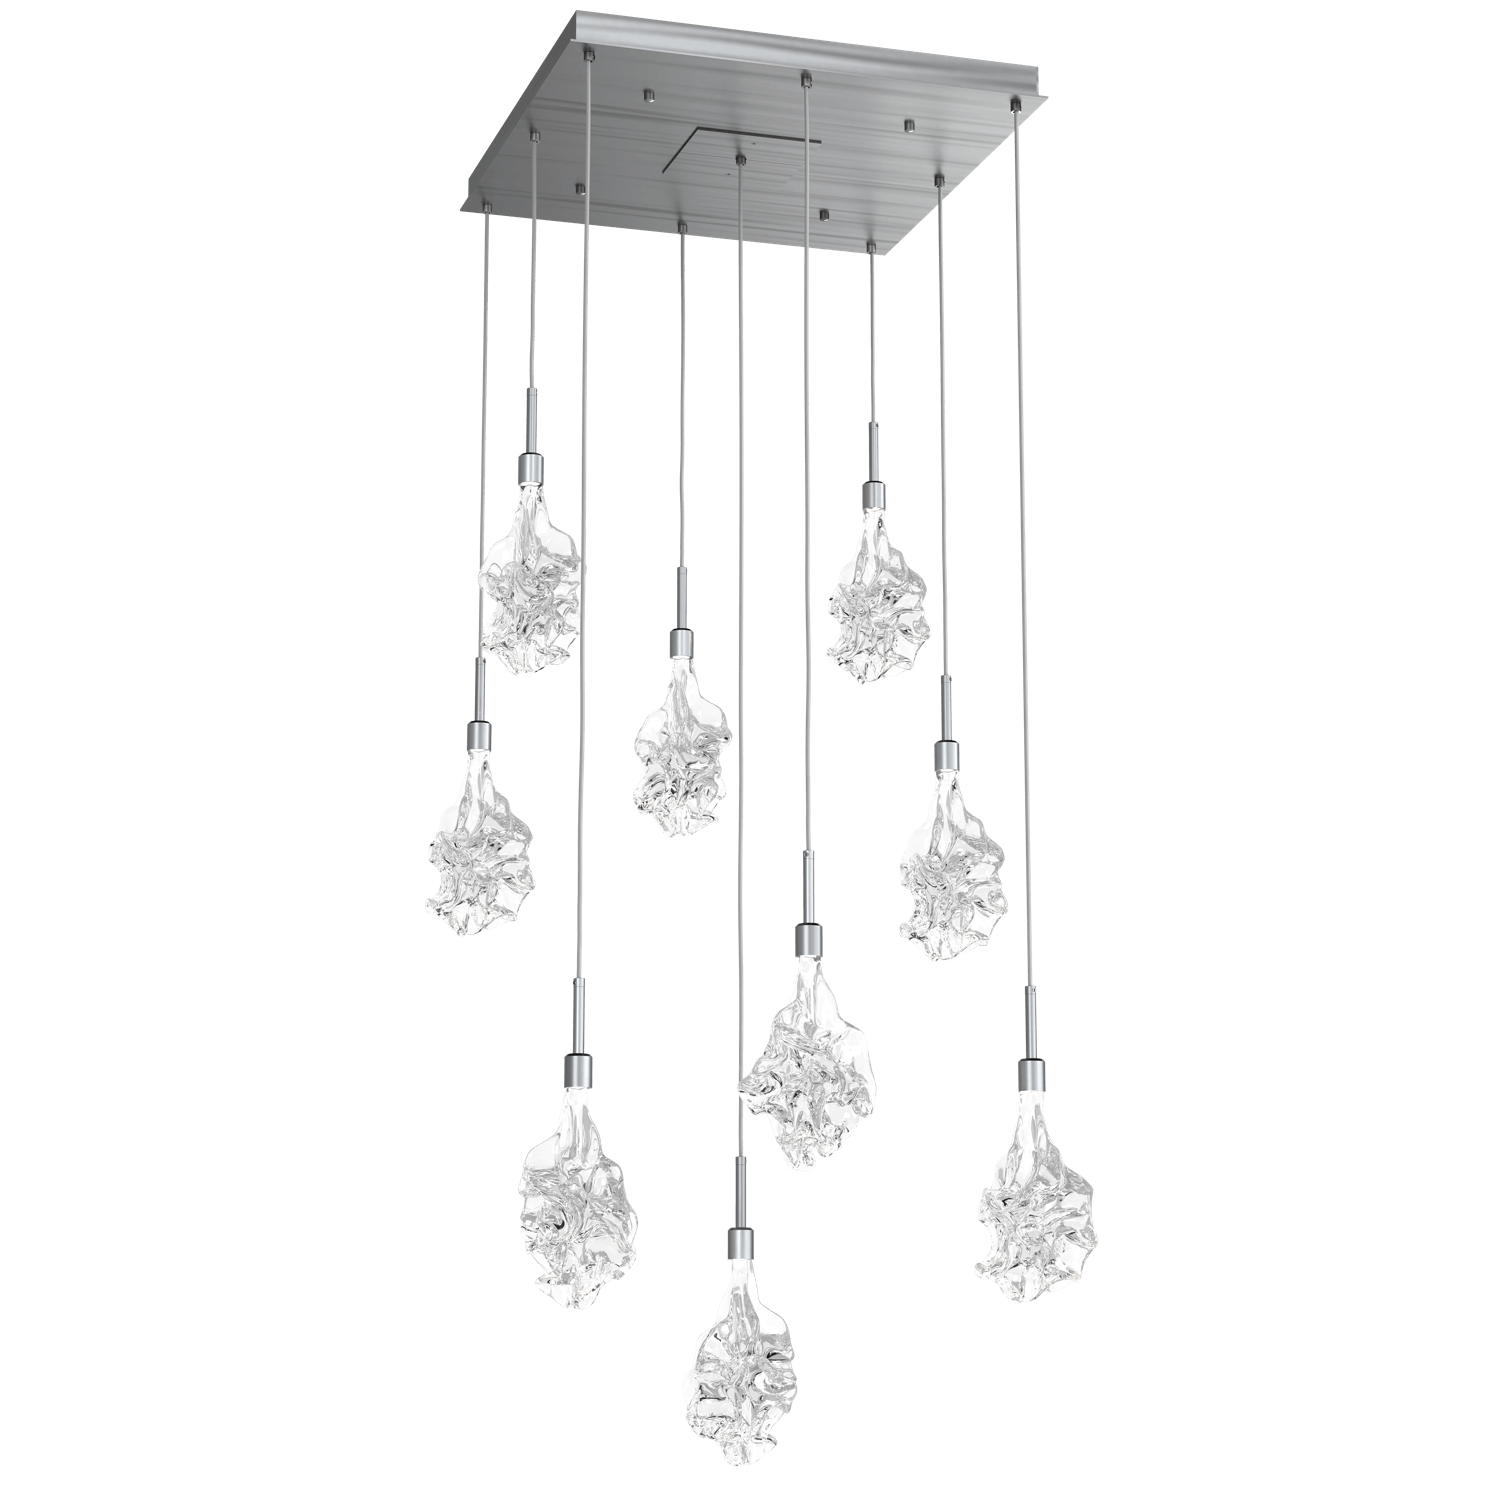 CHB0059-09-GM-Hammerton-Studio-Blossom-9-light-square-pendant-chandelier-with-gunmetal-finish-and-clear-handblown-crystal-glass-shades-and-LED-lamping